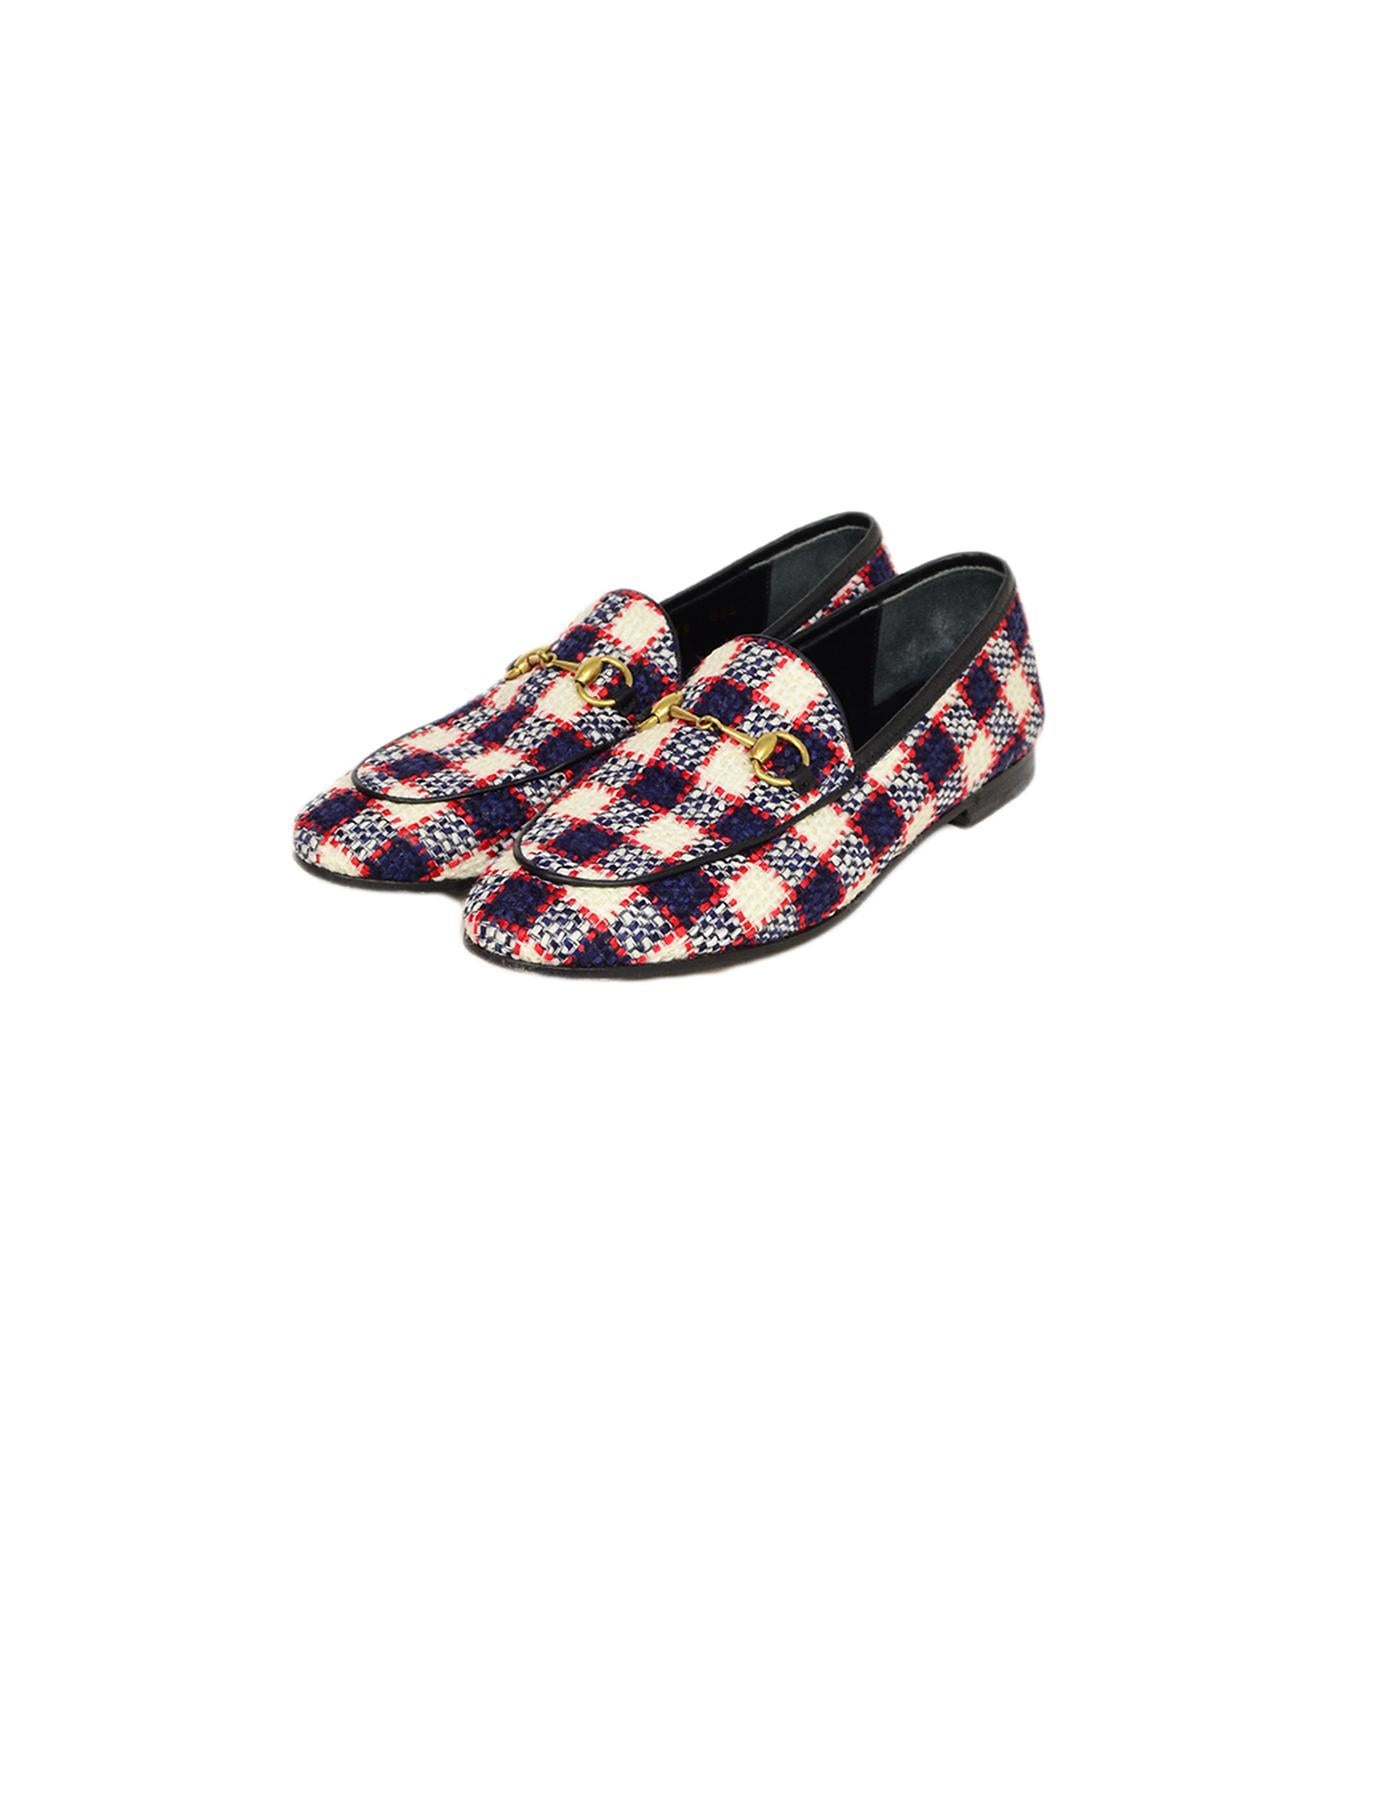 Gucci Vintage Plaid Tweed New Jordaan Check Loafers sz 38

Made In: Italy
Color: Plaid
Hardware: Goldtone
Materials: Tweed, Leather
Closure/Opening: Slip-on
Overall Condition: Excellent vintage condition, with the exception of wear on the heels and